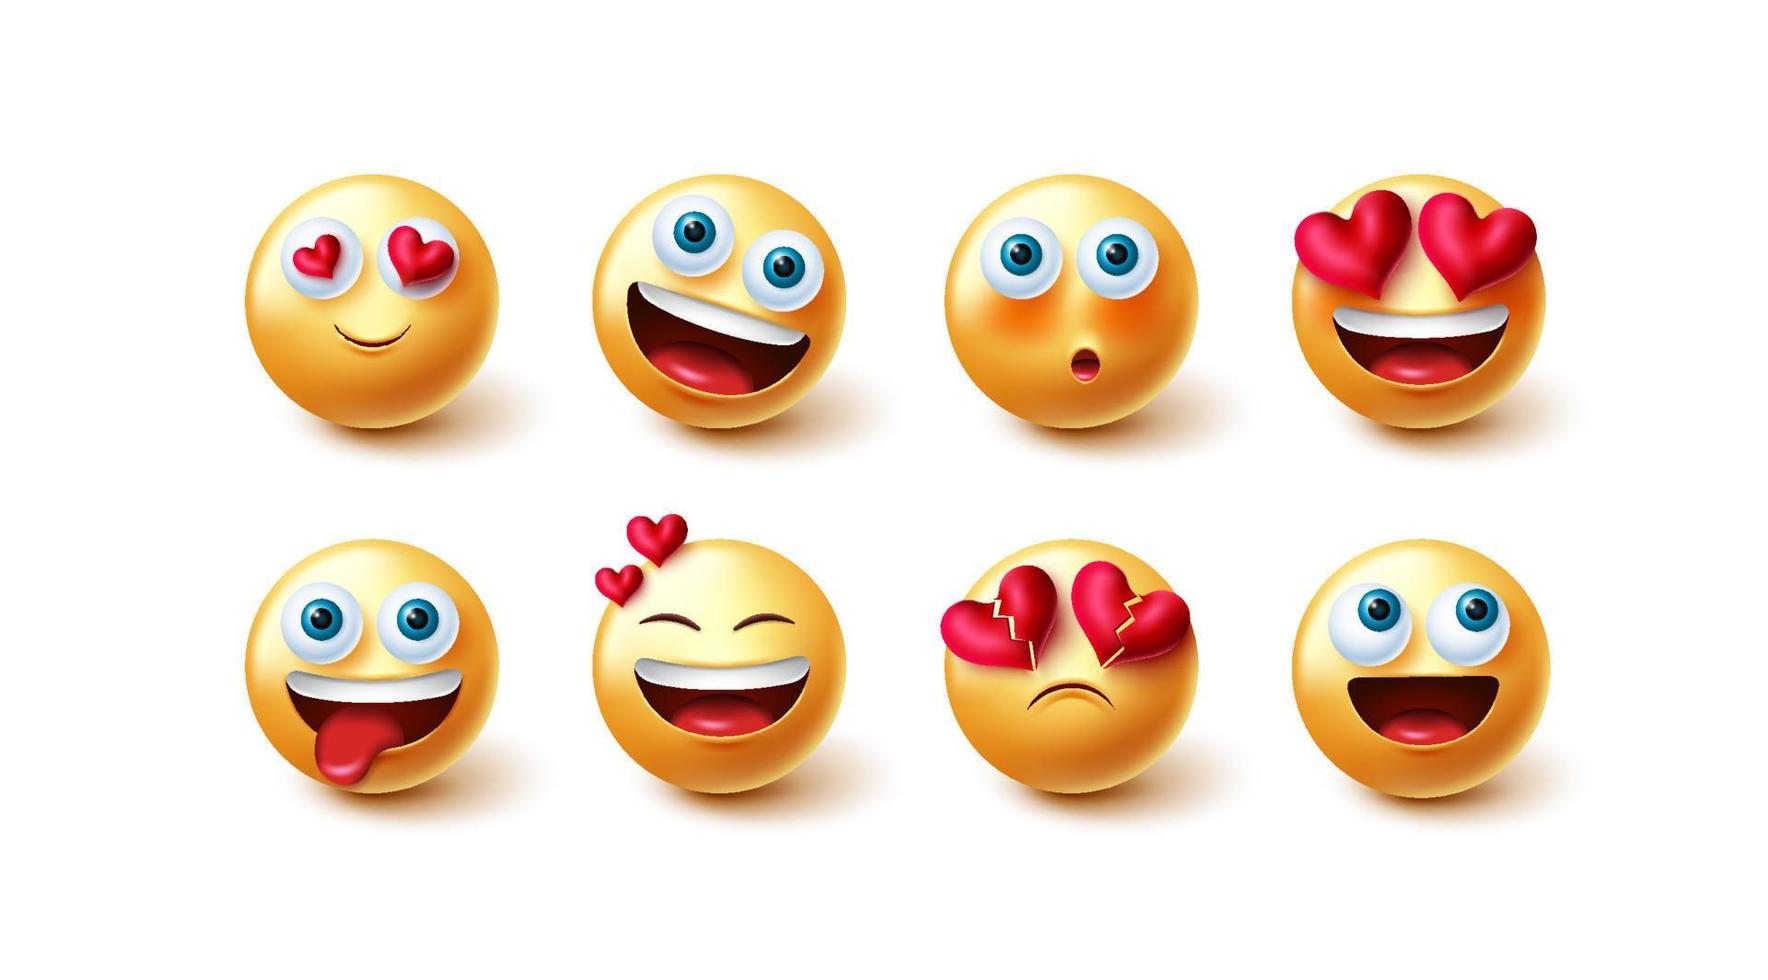 Emojis in love vector set. 3d love emoji characters with hearts element in smiling and blushing face expression for cute valentines emoticons graphic design collection. Vector illustration.